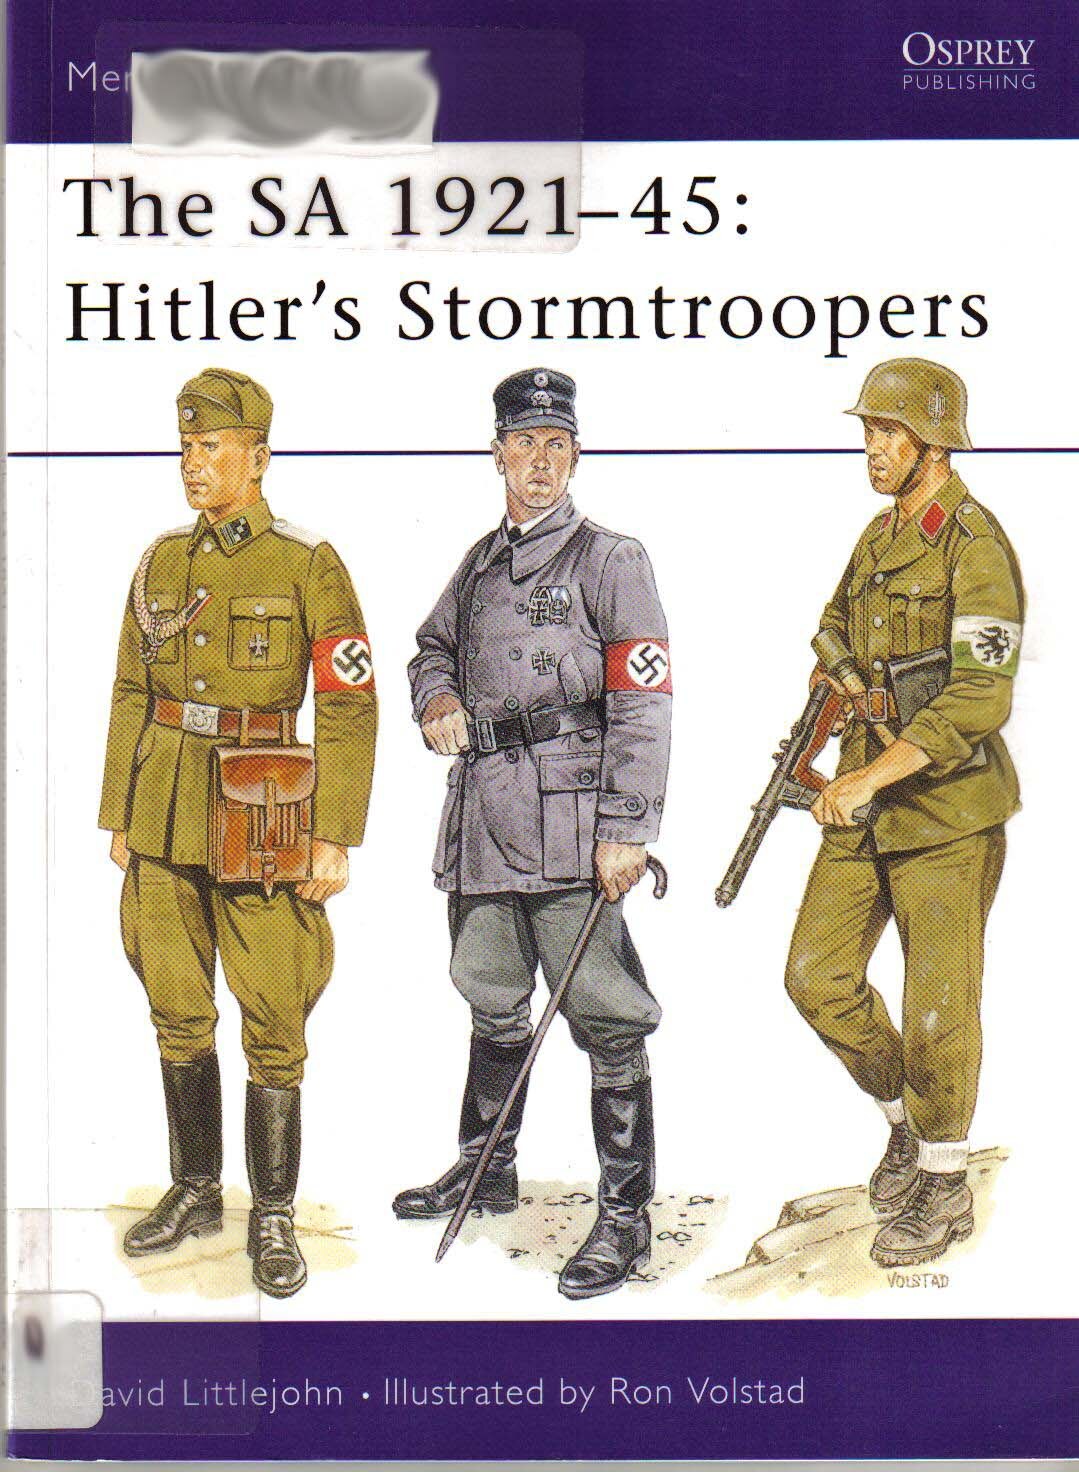 Littlejohn, David; The S.A. 1921-45; Hitler's Stormtroopers